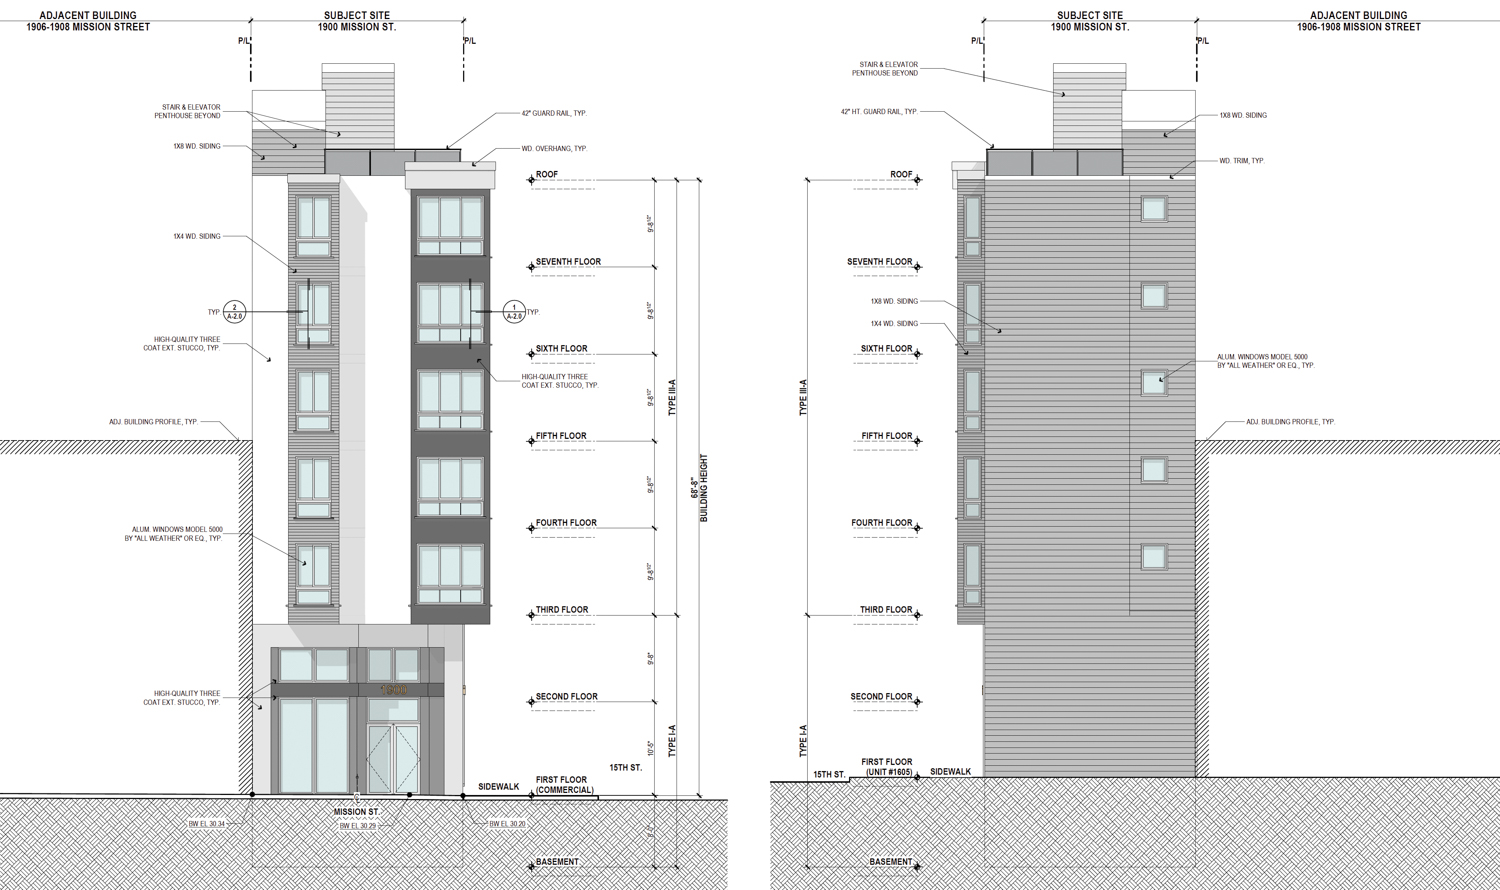 1900 Mission Street front and rear elevations, illustration by Schaub Li Architects